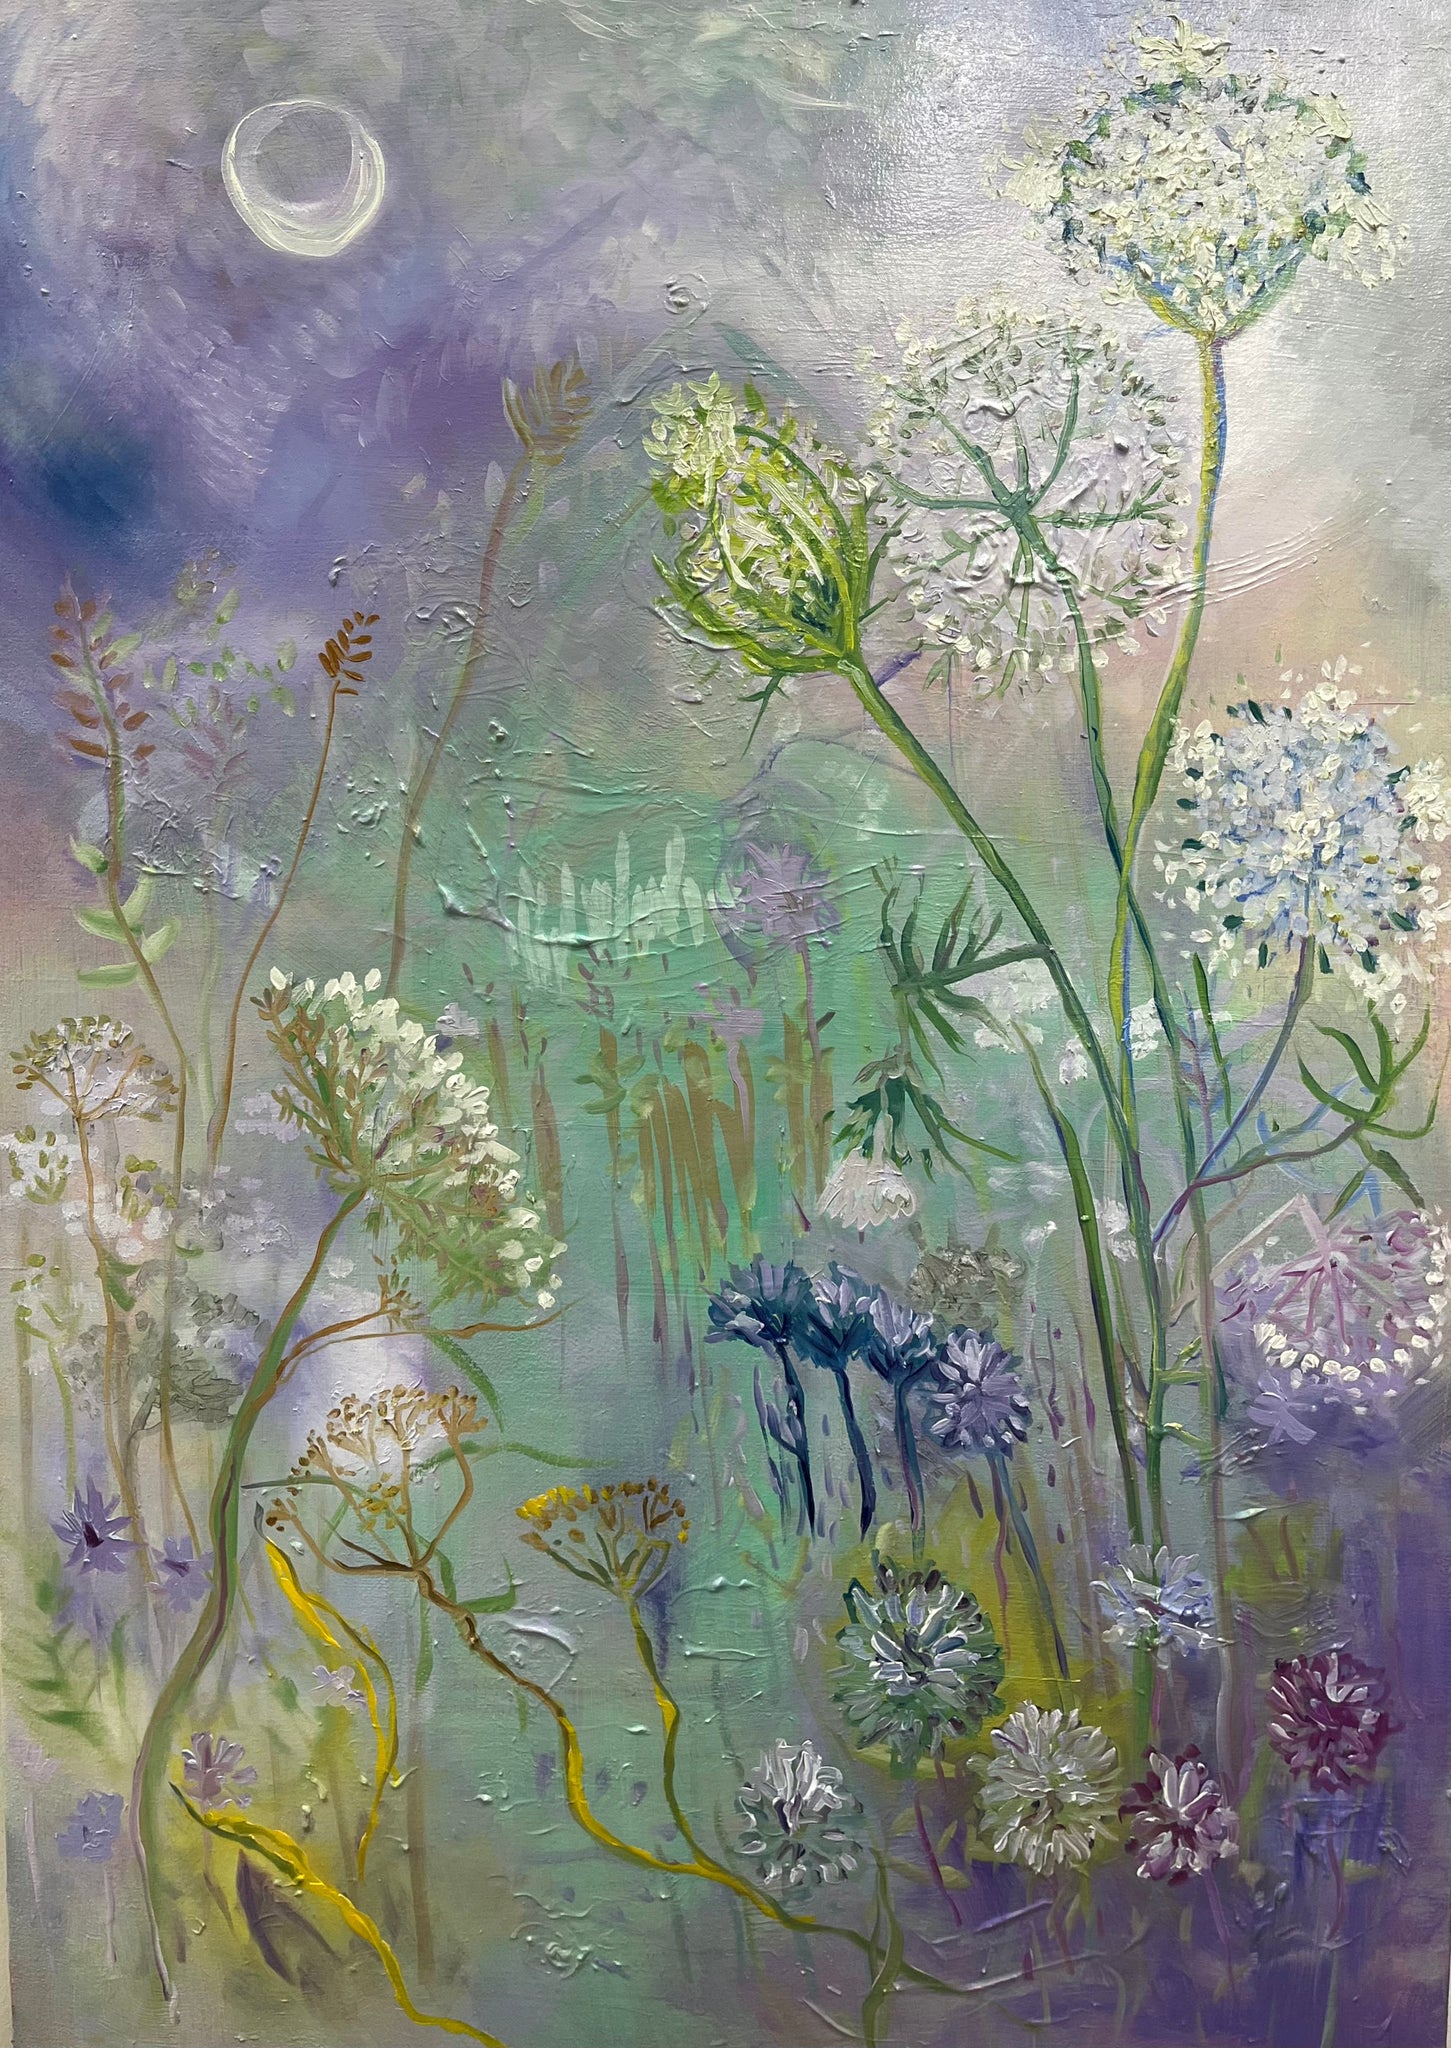 ORIGINAL Painting "Lace and Cornflowers"